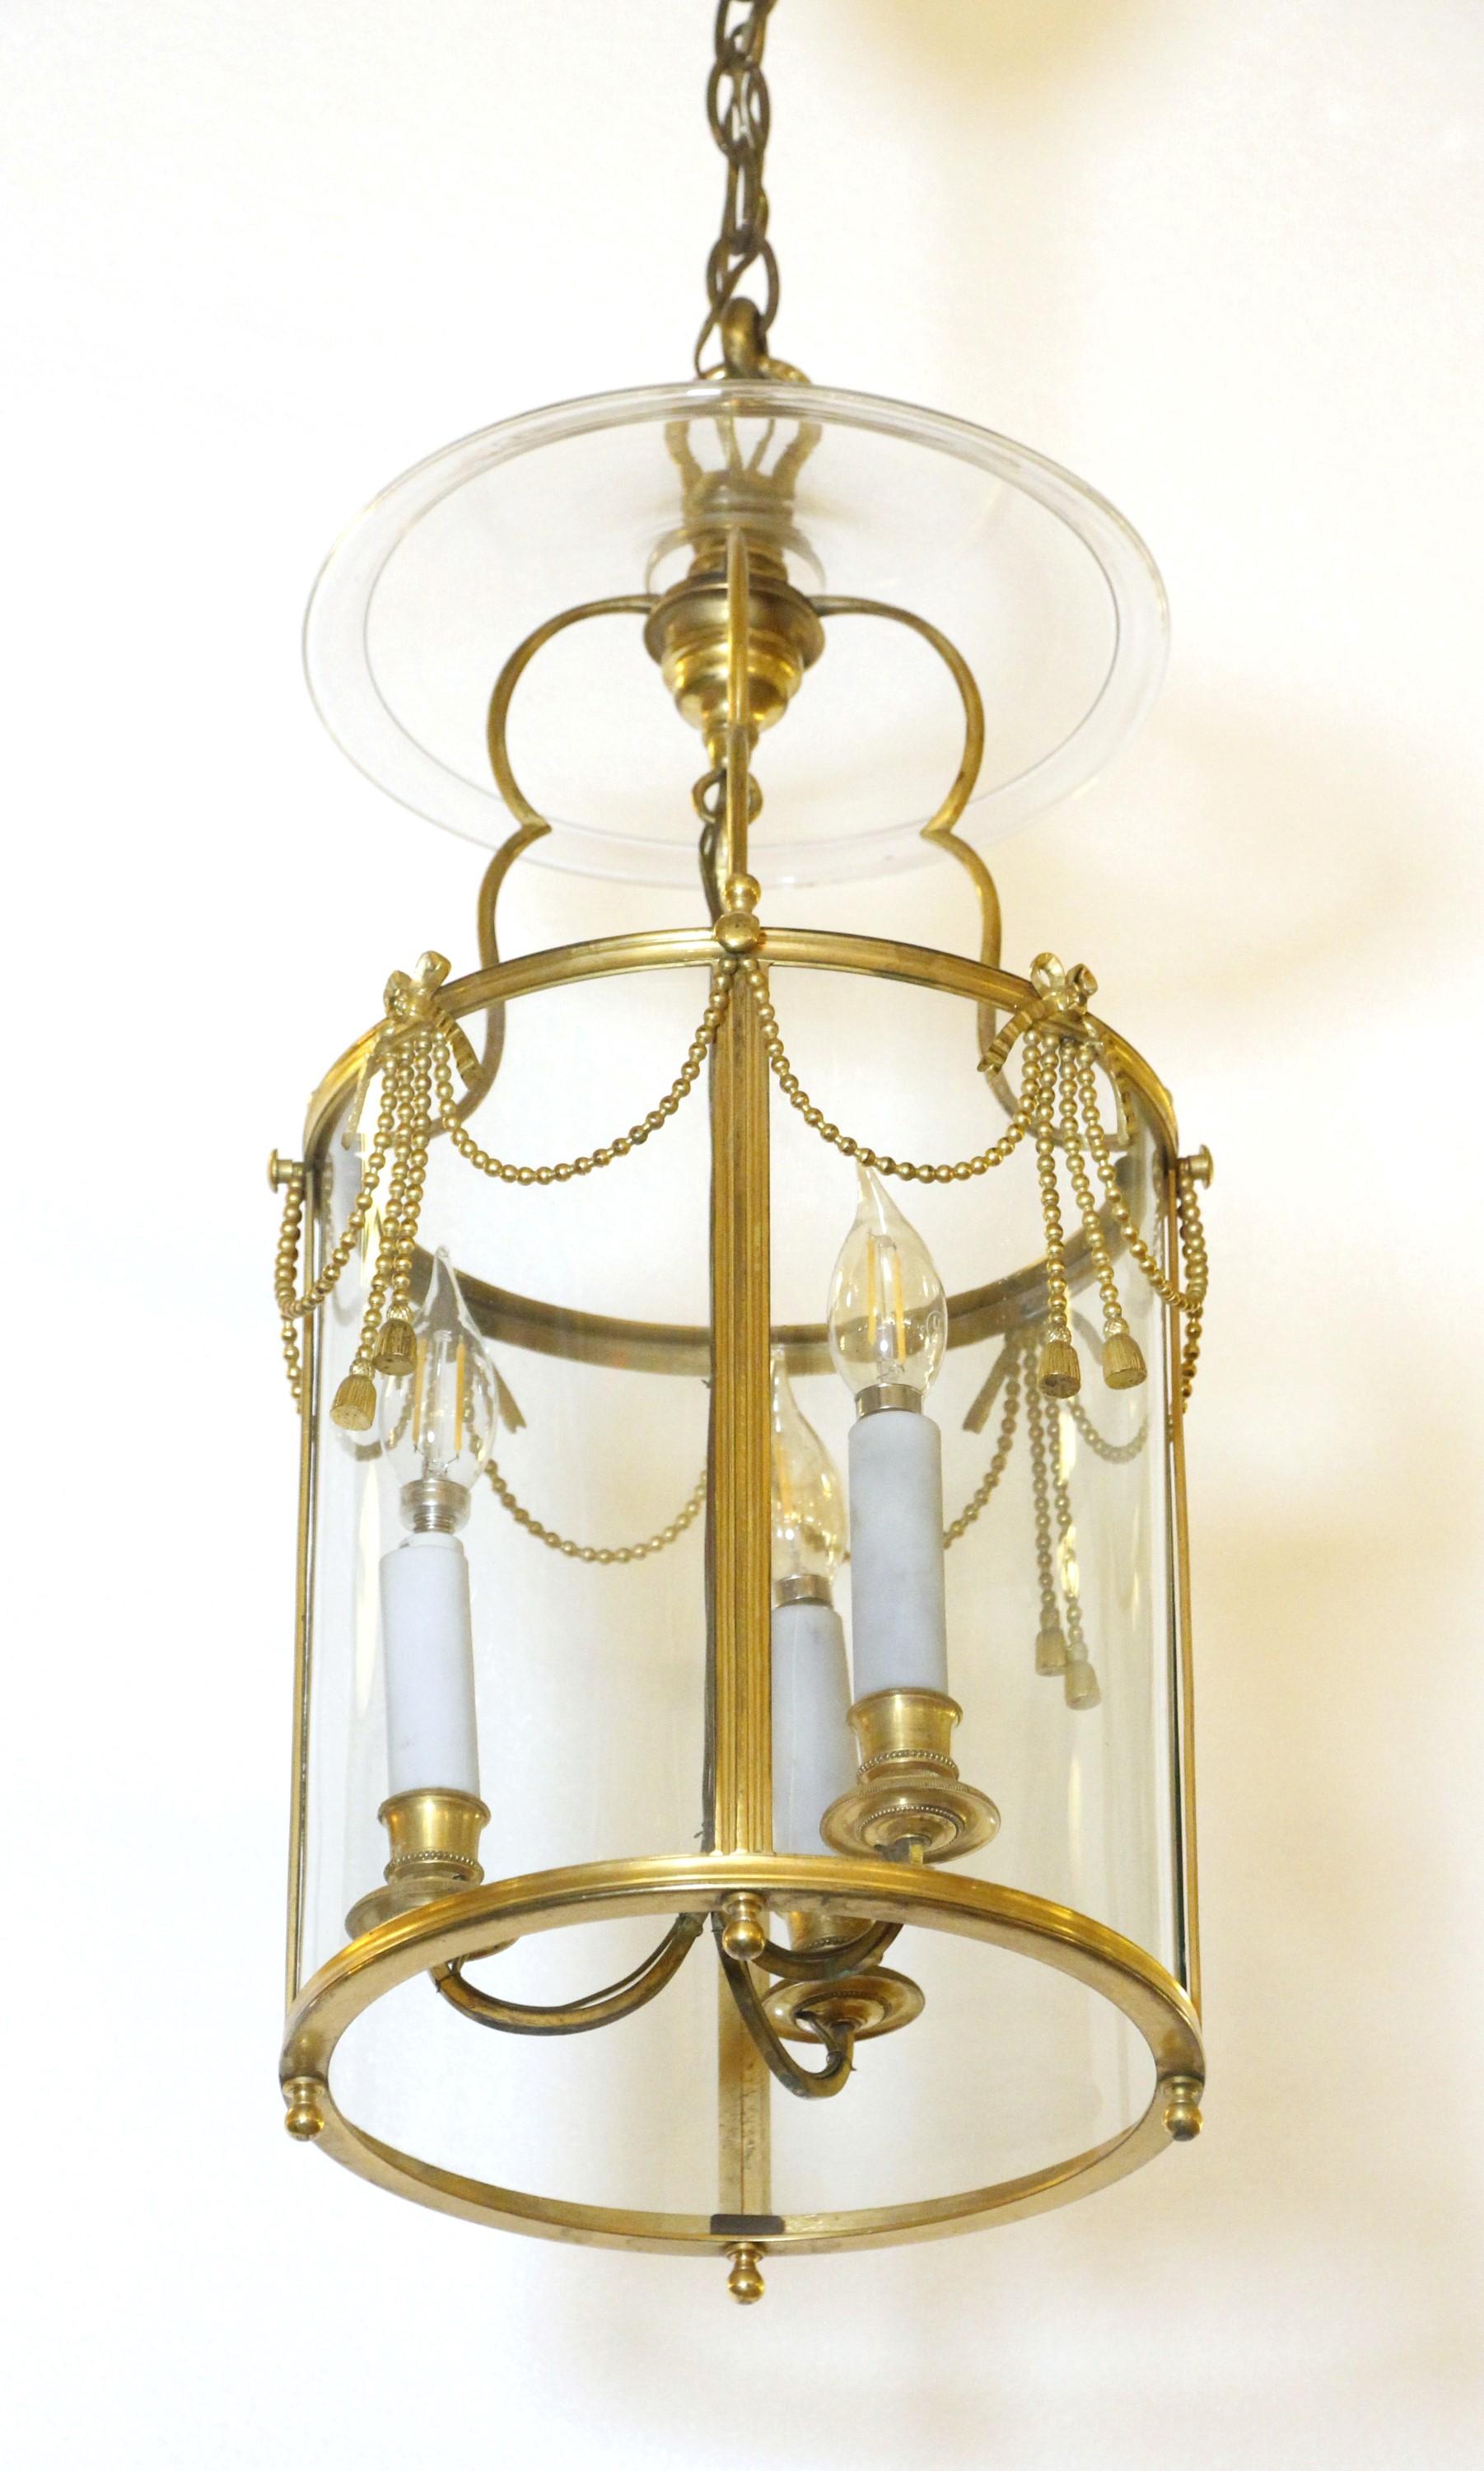 French Provincial French Gilded Lantern Light - 3-Arms w/ Tassels & Ribbons For Sale